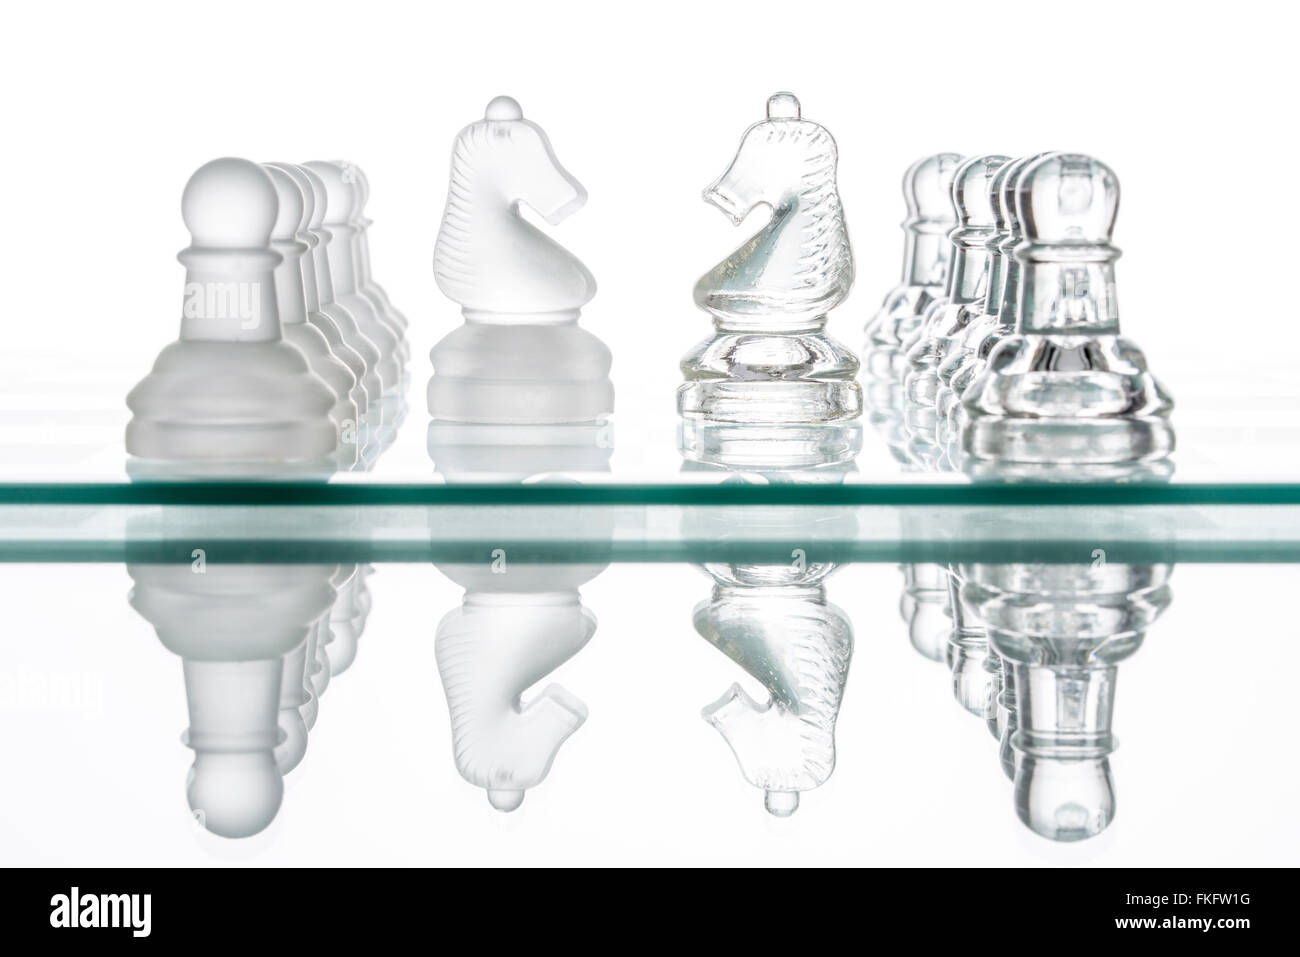 two chess horses, business  face to face war confrontation Stock Photo